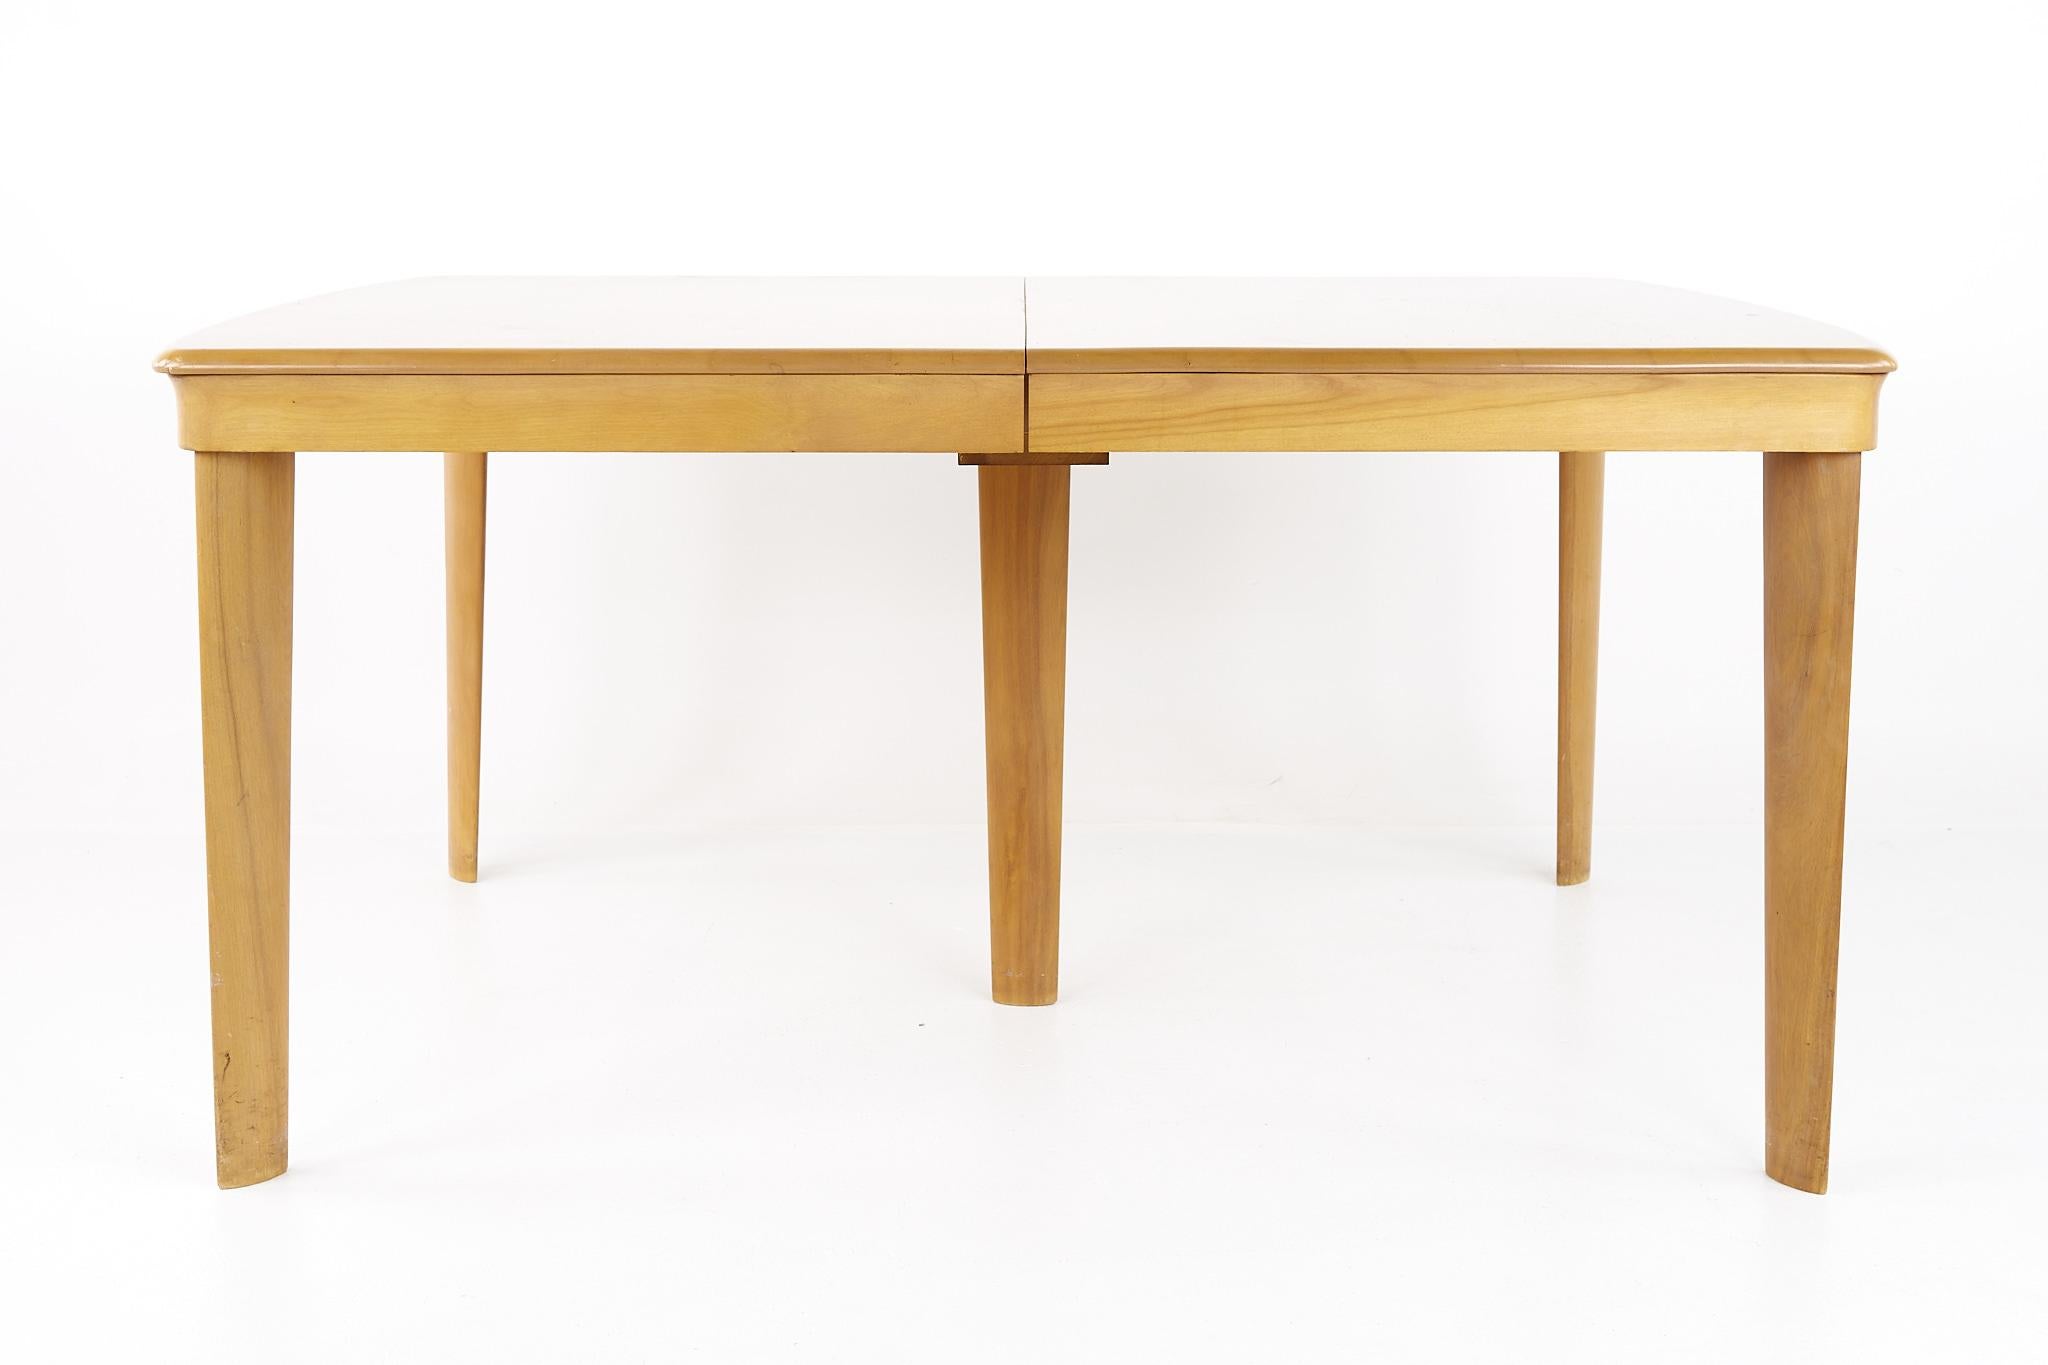 Heywood Wakefield mid century dining table

This table measures: 61 wide x 42.5 deep x 29 inches high, with a chair clearance of 25.5 inches, each of the 2 leaves are 15 wide making a maximum table width of 91 inches

All pieces of furniture can